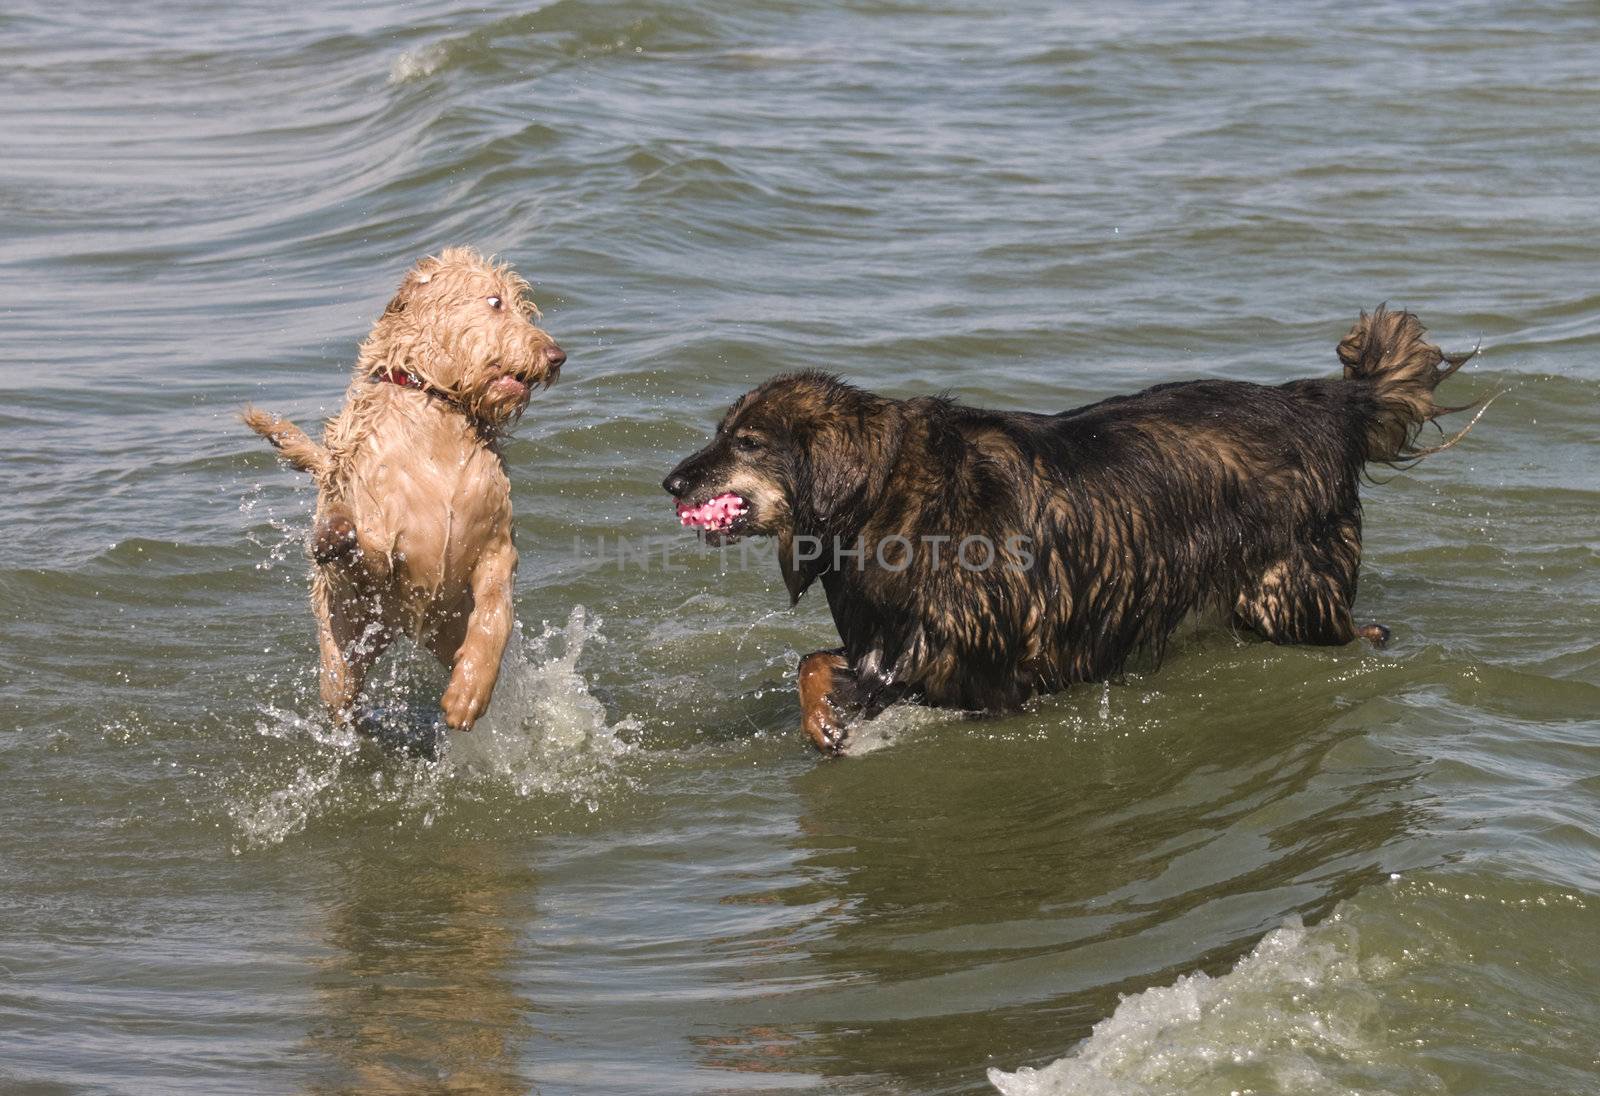 One dog retrieving the ball while the other challenges for the ball at the lake